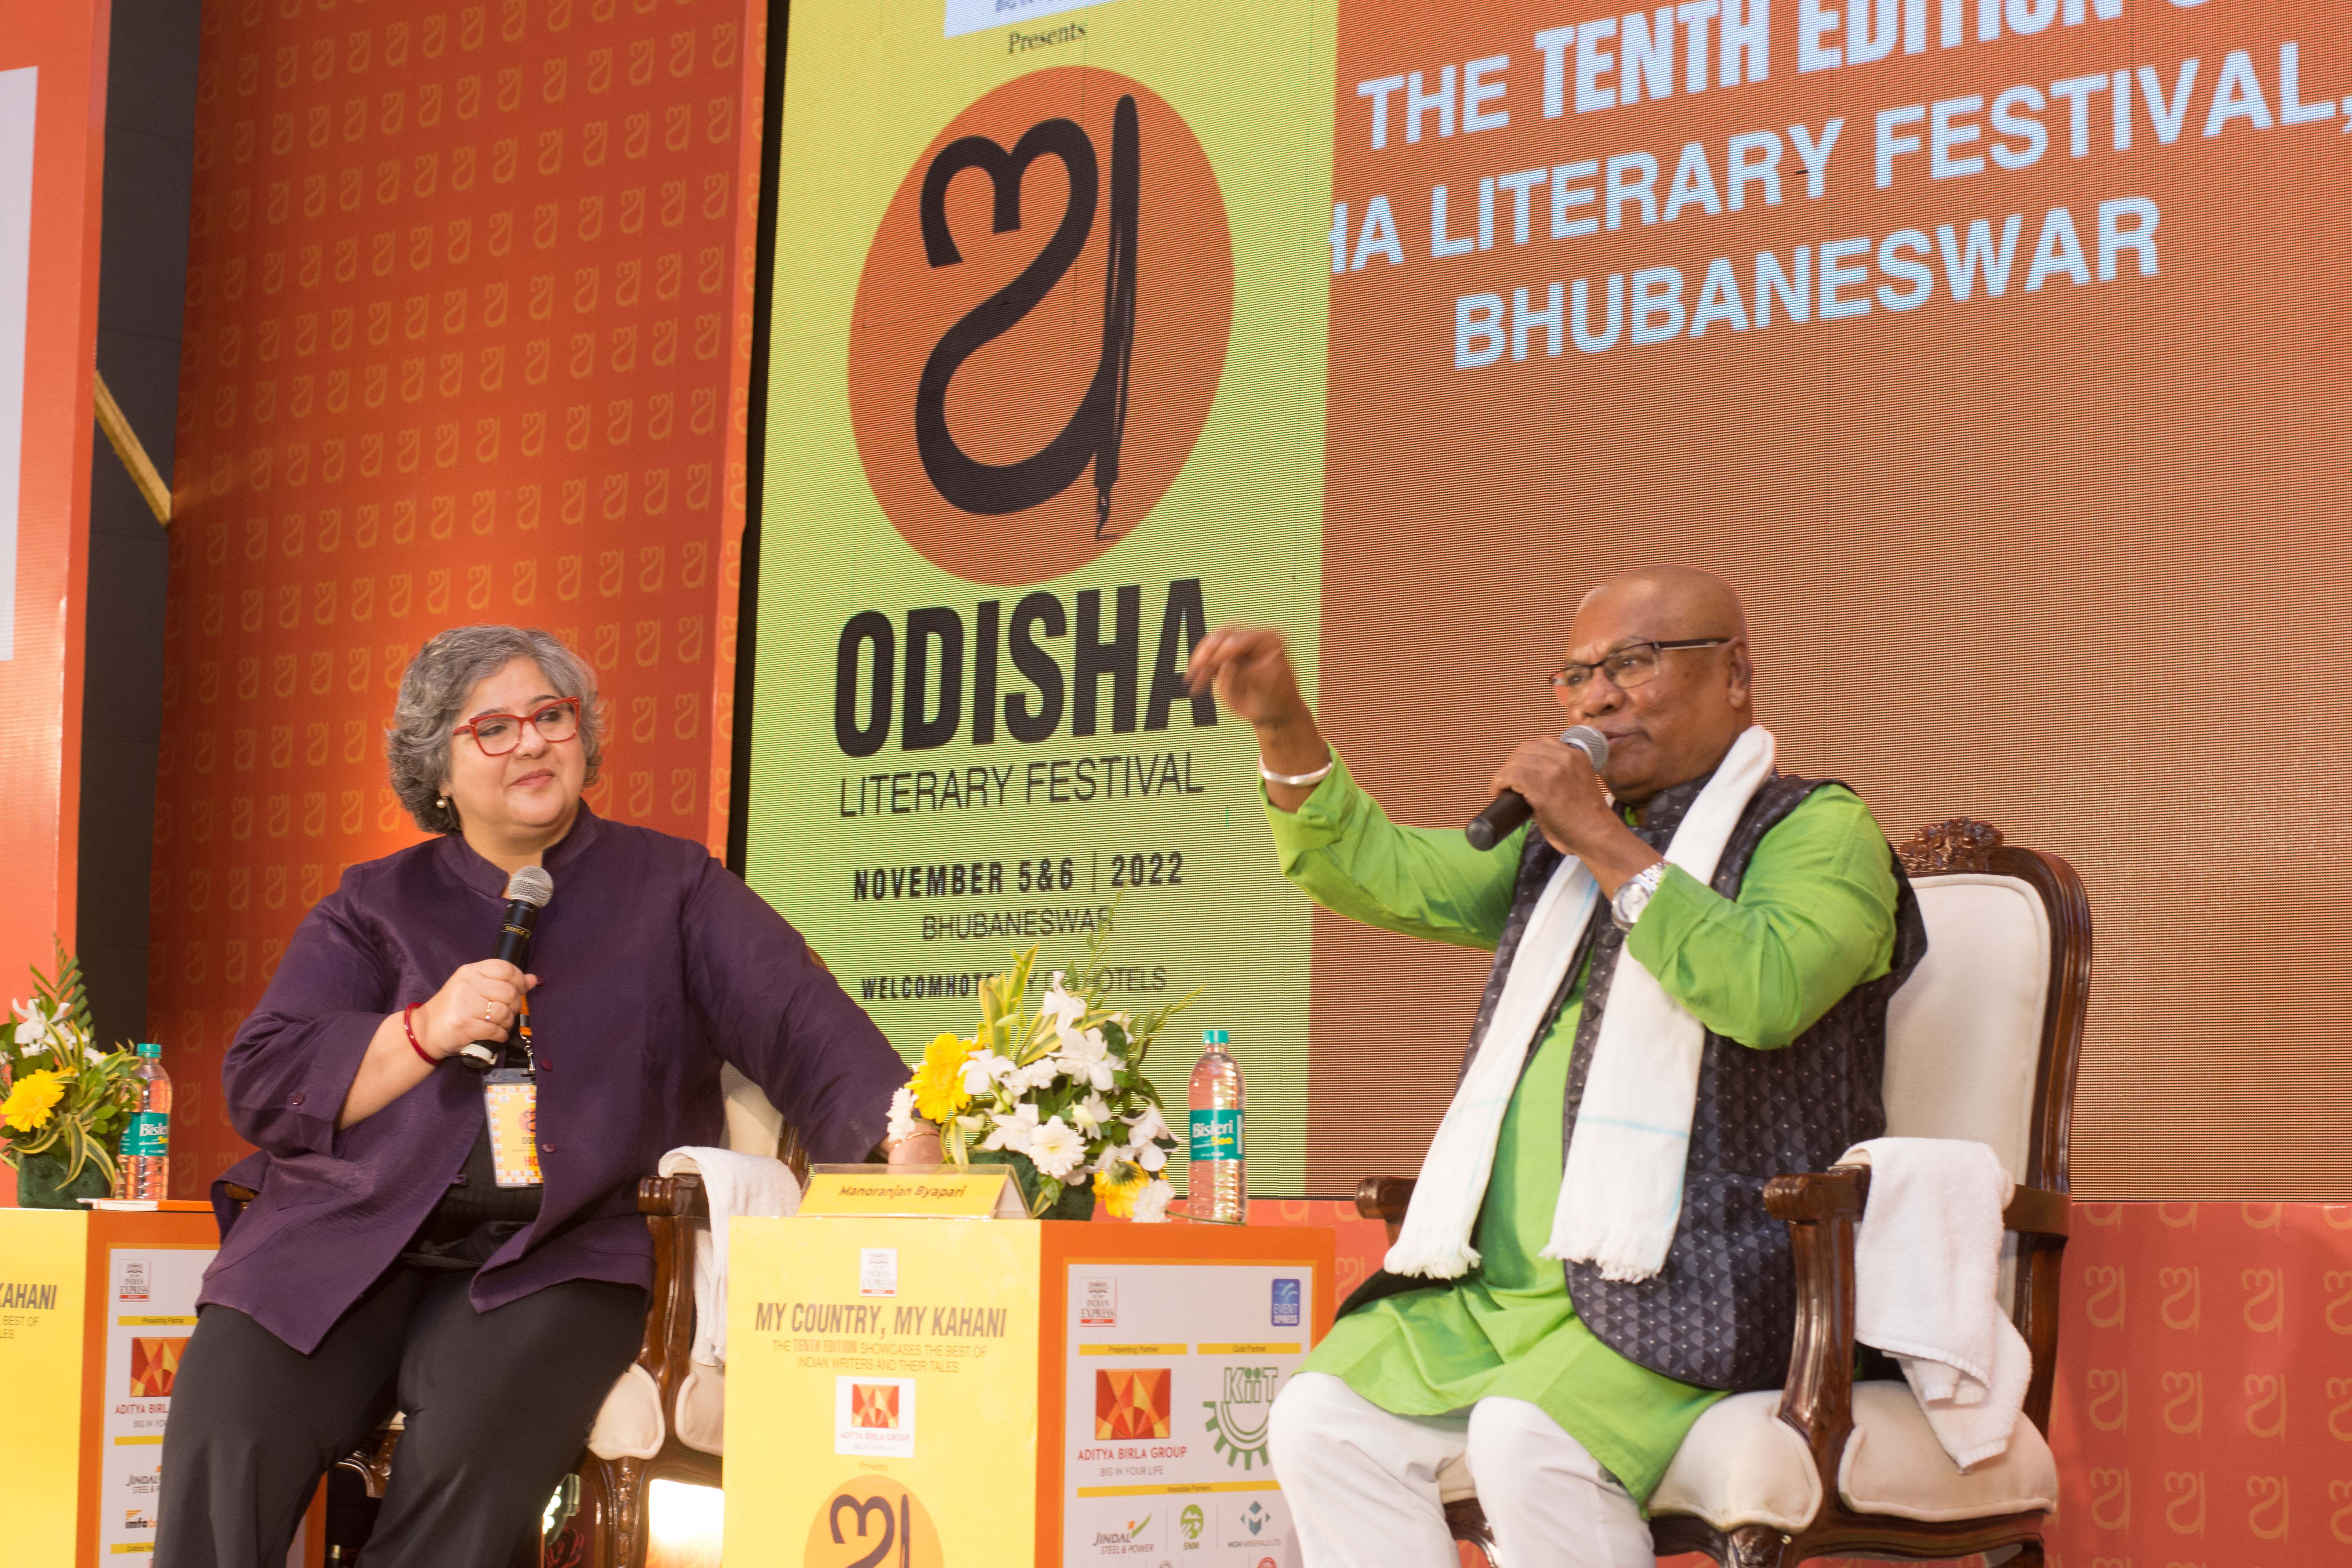 Left to right - Host Kaveree Bamzai, Manoranjan Byapari, author and politician speaks during the third session - From Rickshawala to MLA: How I Rewrote My Life, on the first day of Odisha Literary Festival in Bhuabneswar. Express / DEBADATTA MALLICK